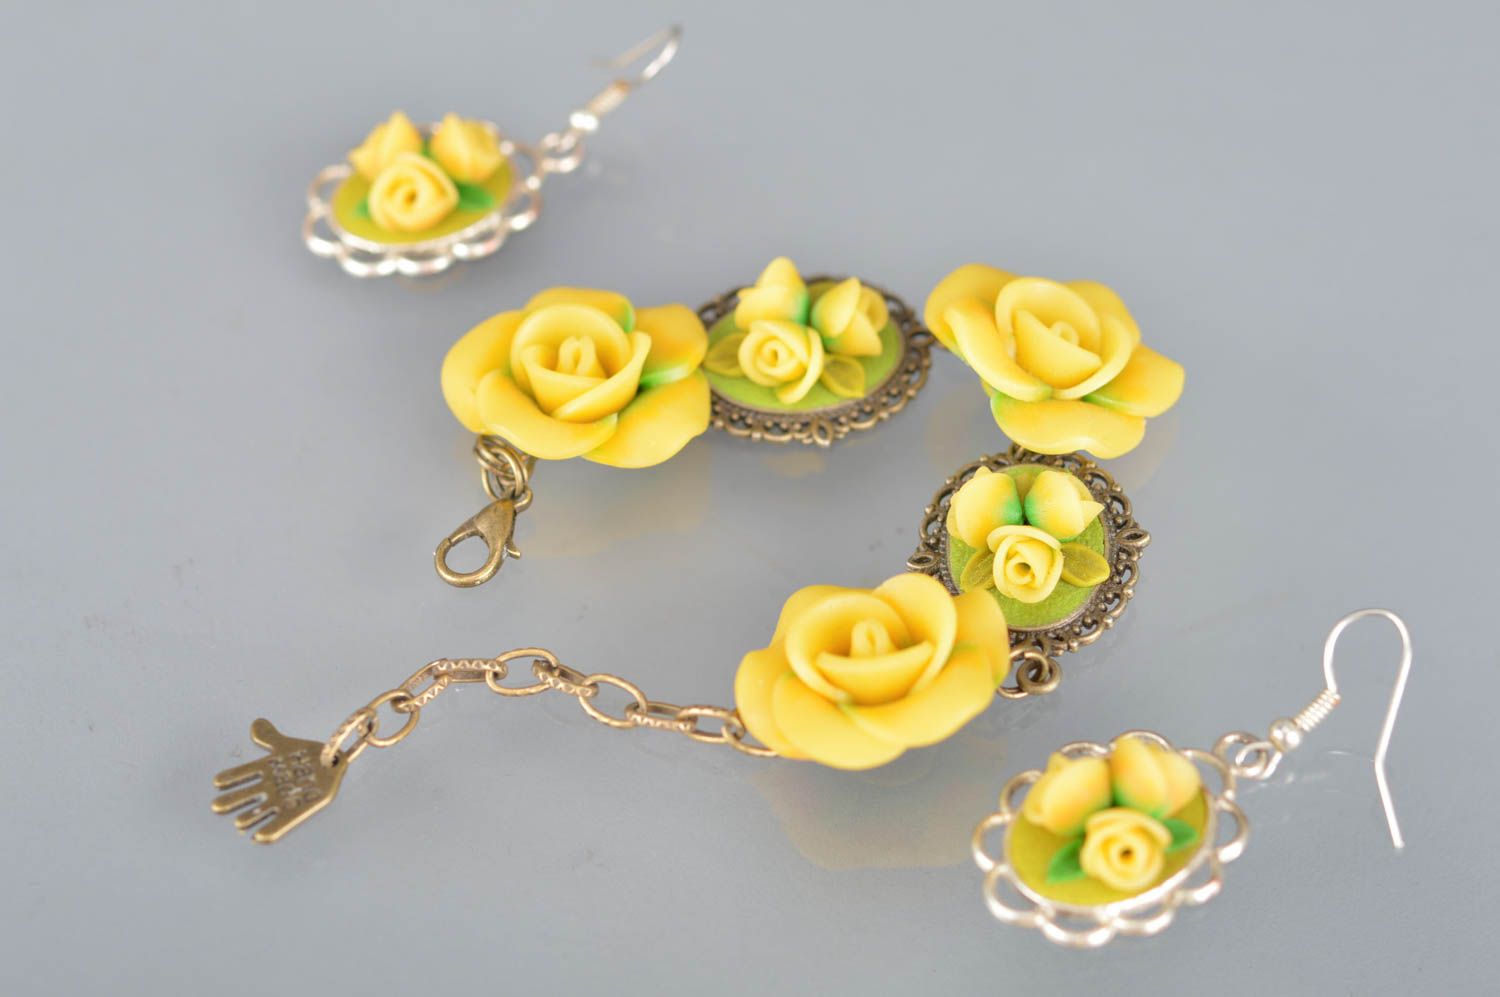 Handmade set of jewelry made of polymer clay bracelet and earrings yellow roses photo 1